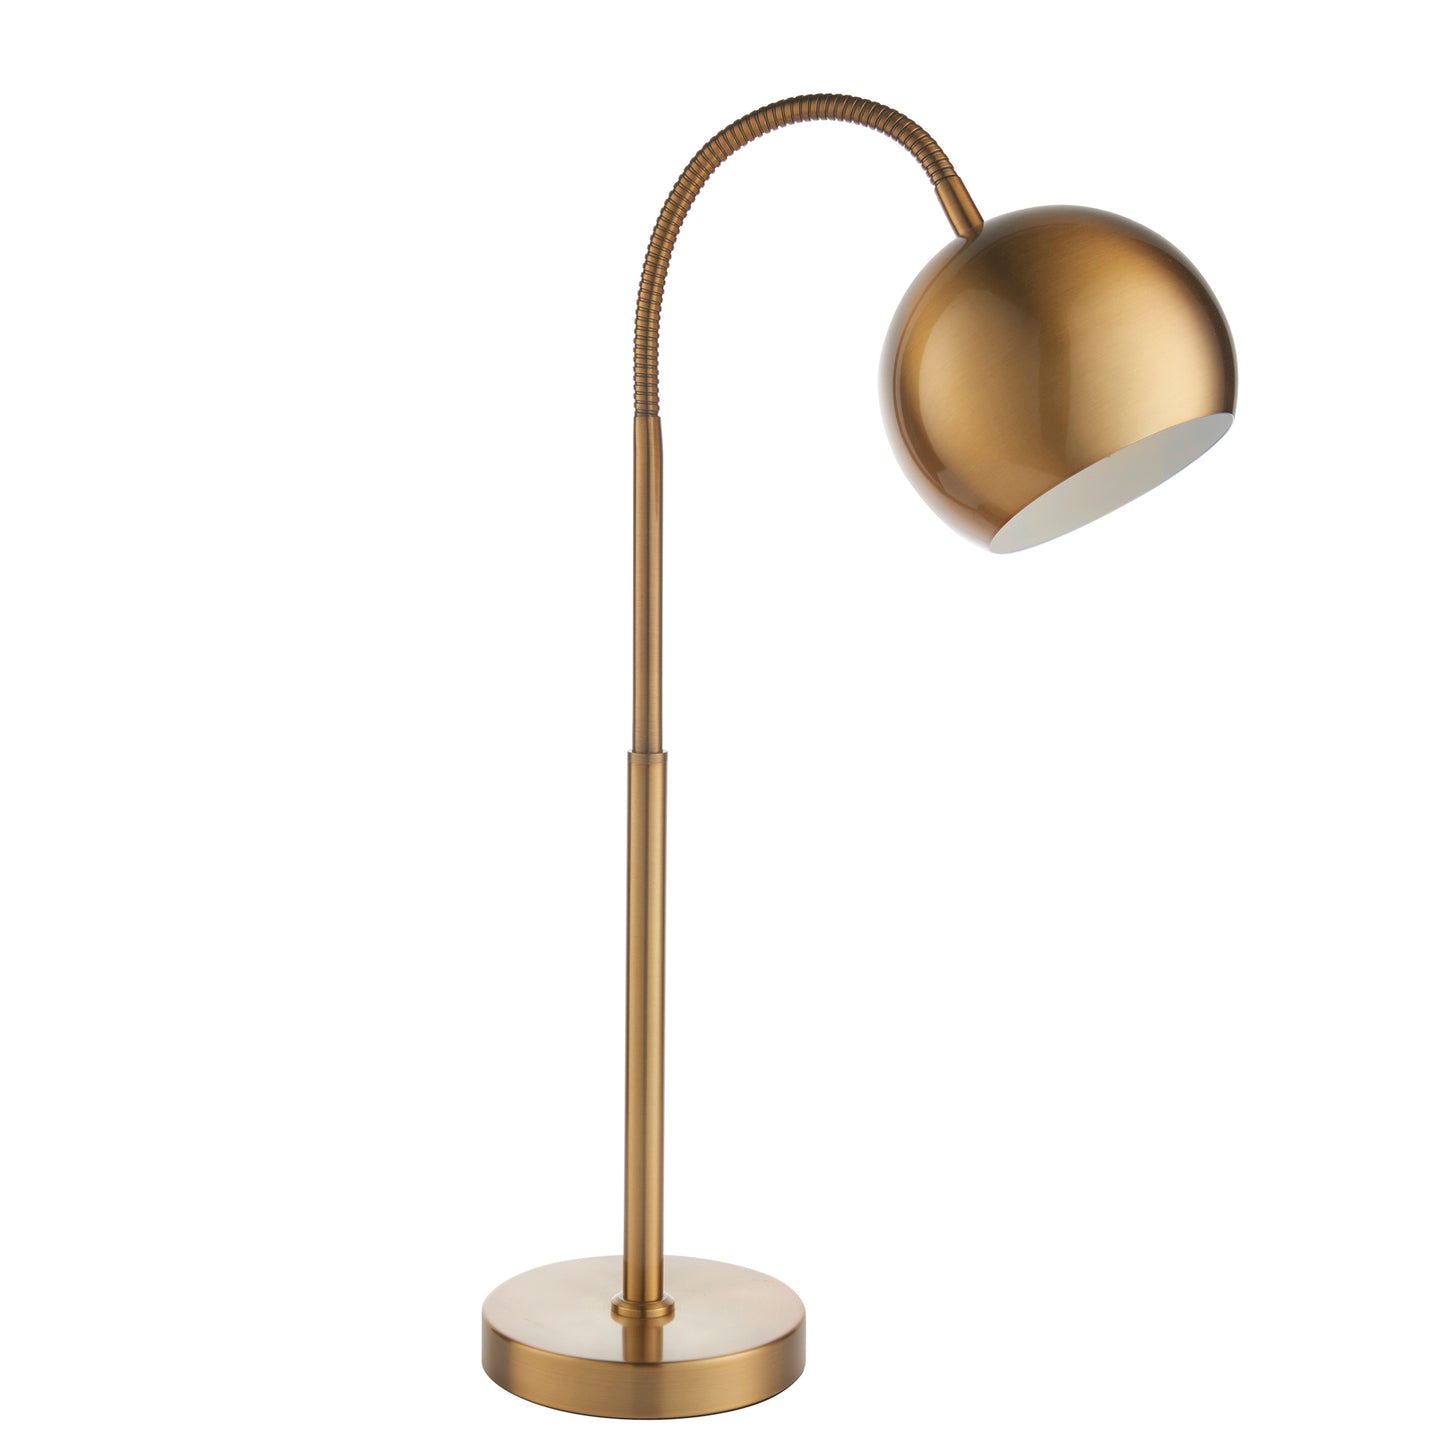 A Beesand Table Lamp Bronze by Kikiathome.co.uk, an interior decor item, on a white background.